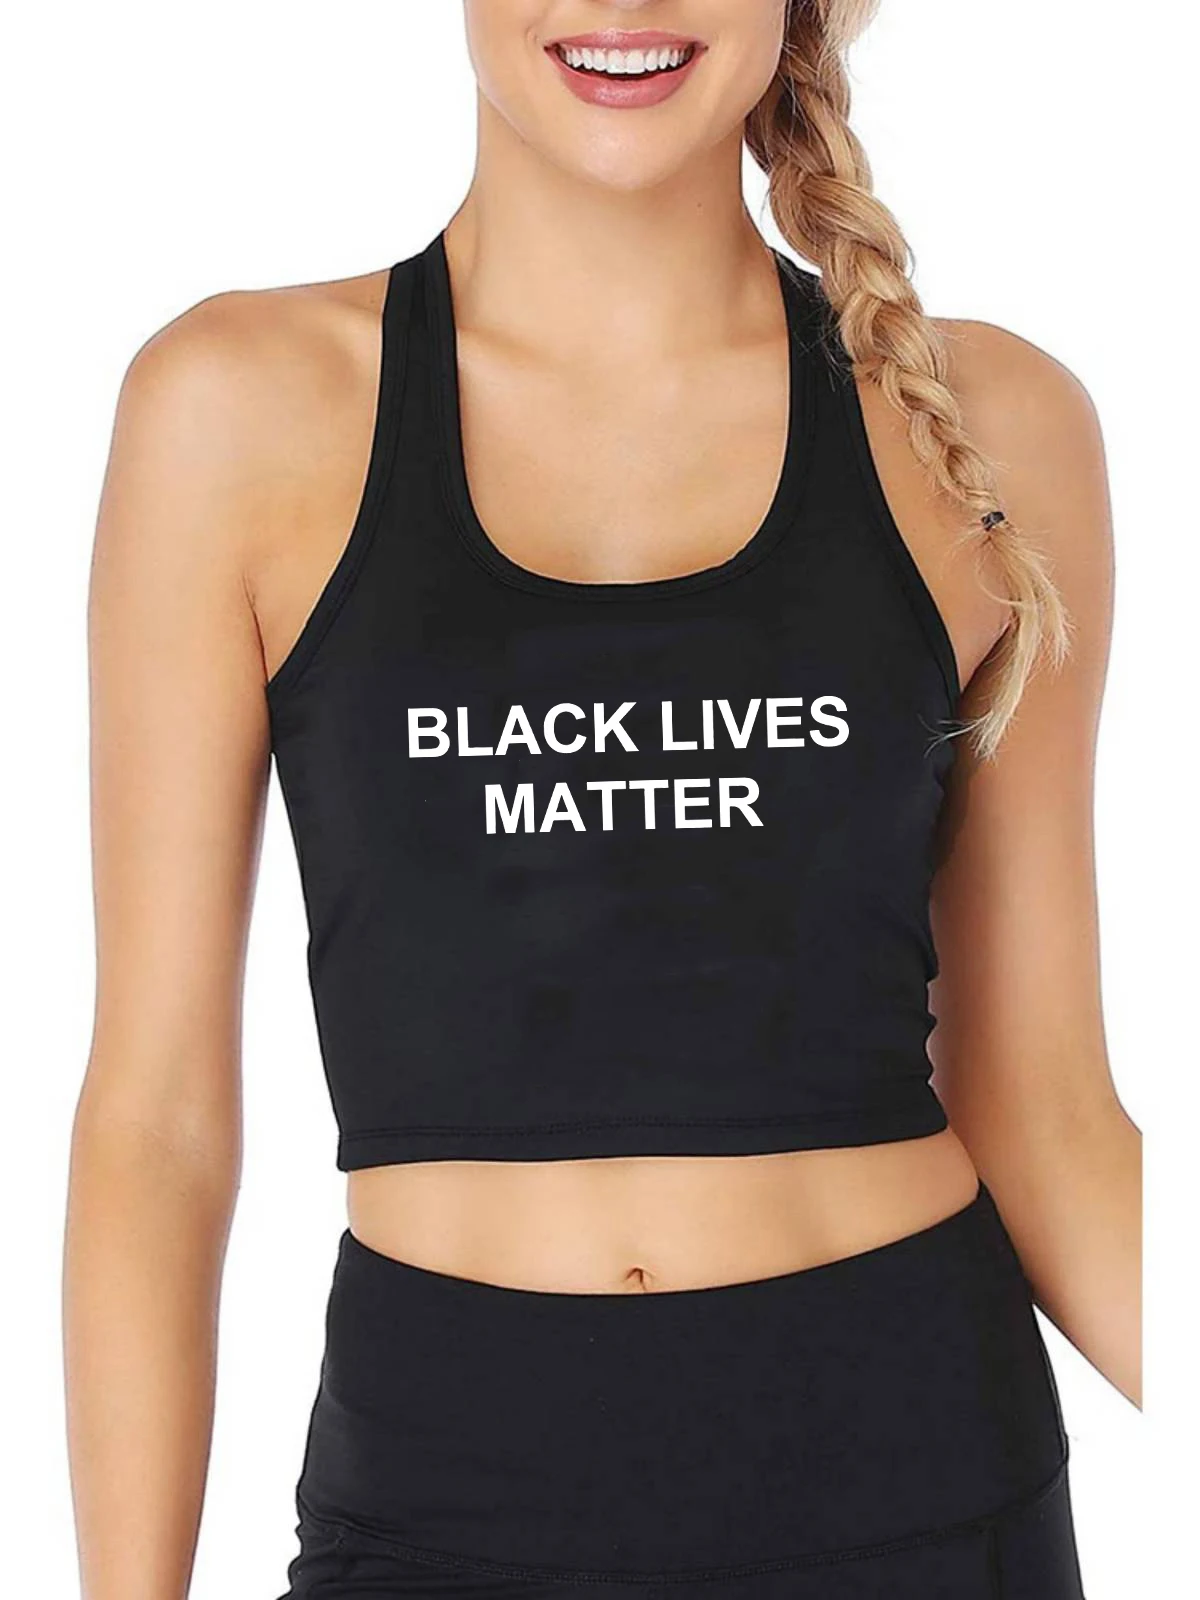 

Black Lives Matter text design sexy crop top women's customizable fashion creative tank tops peace and equality camisole